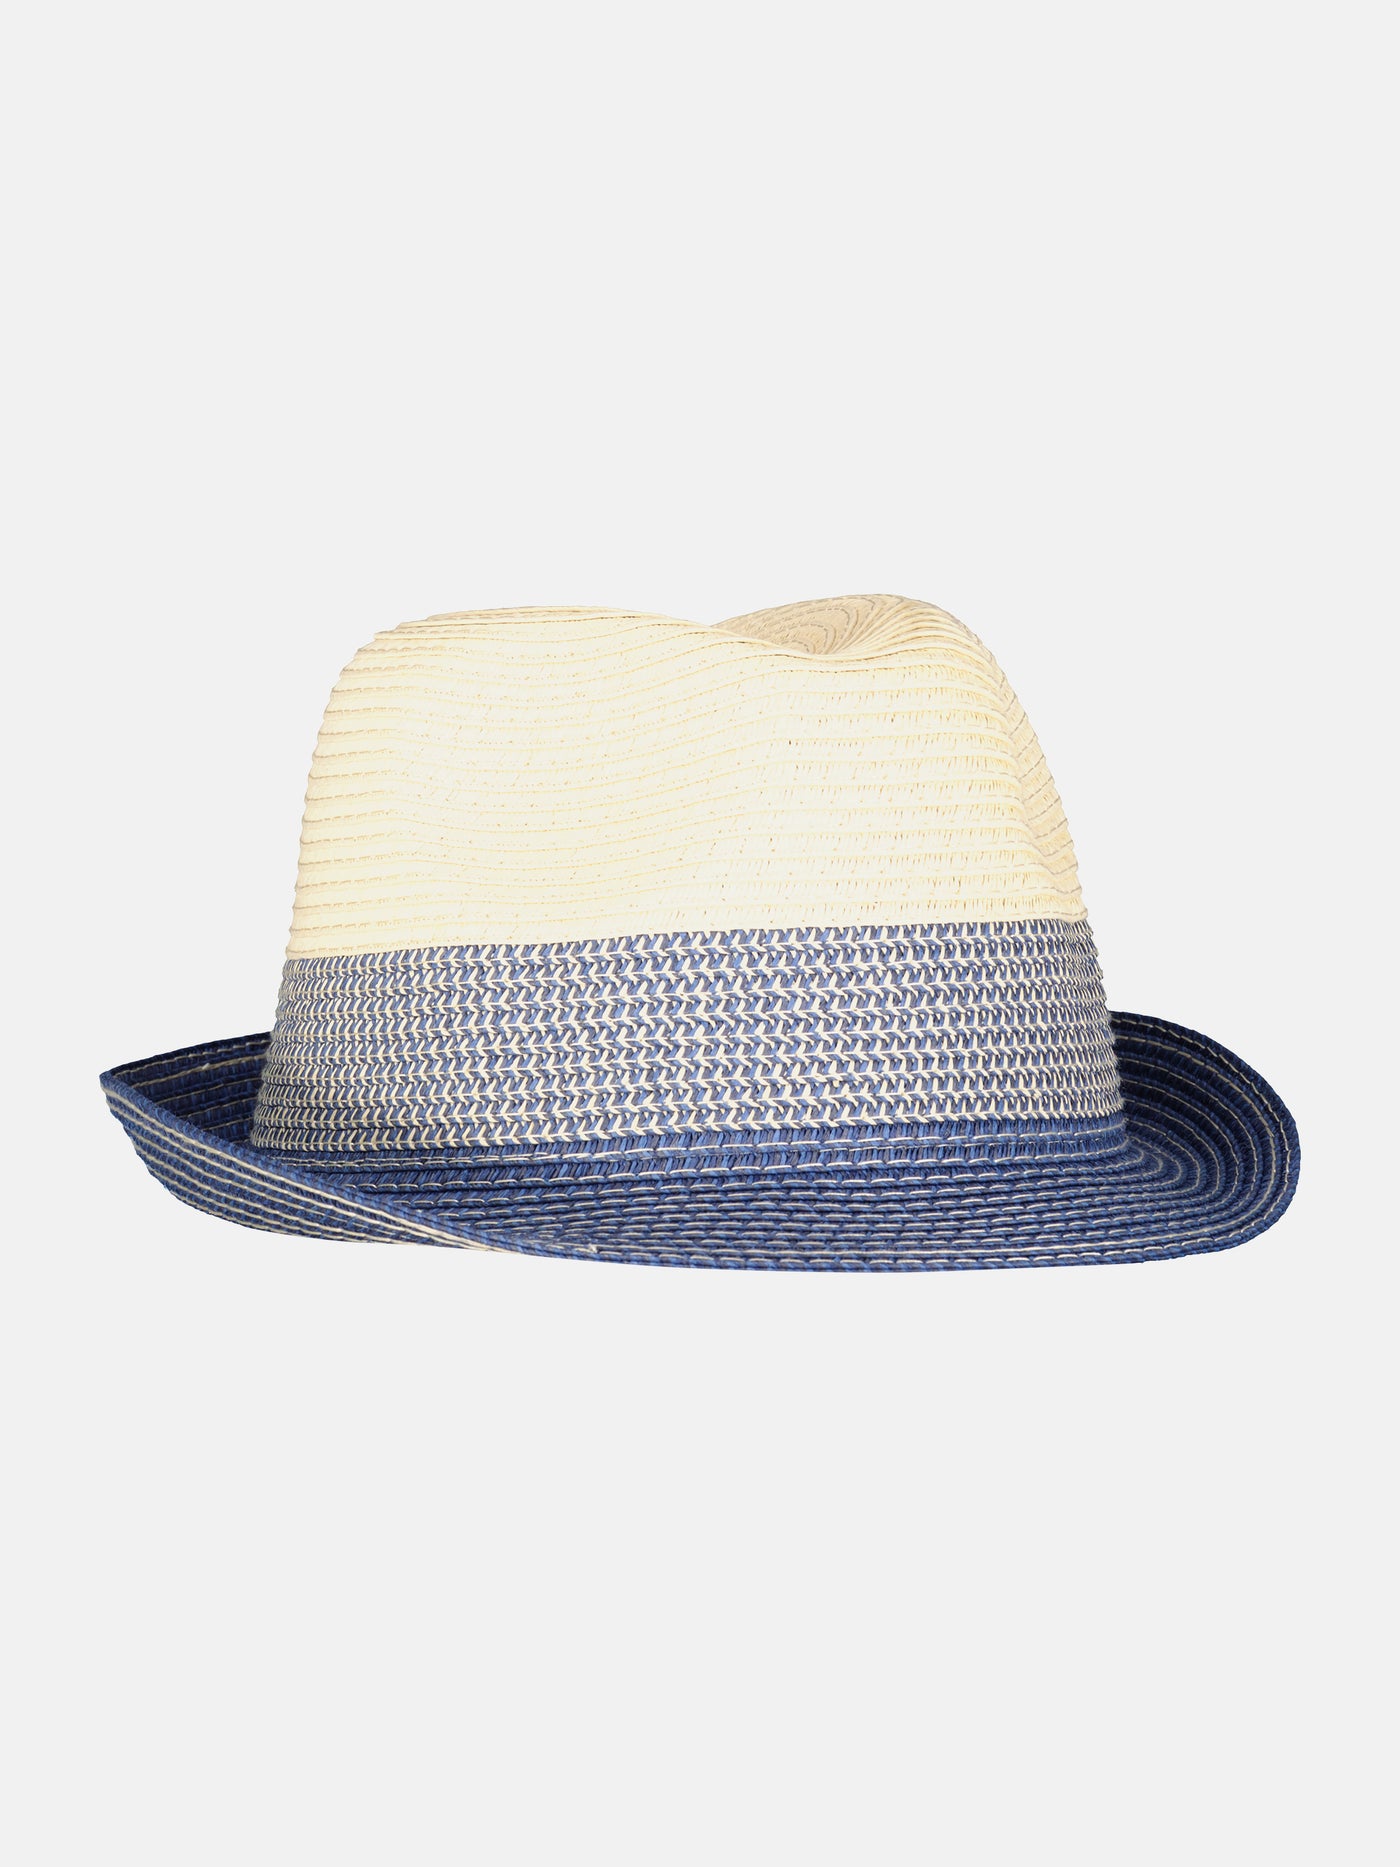 Straw hat with colored brim